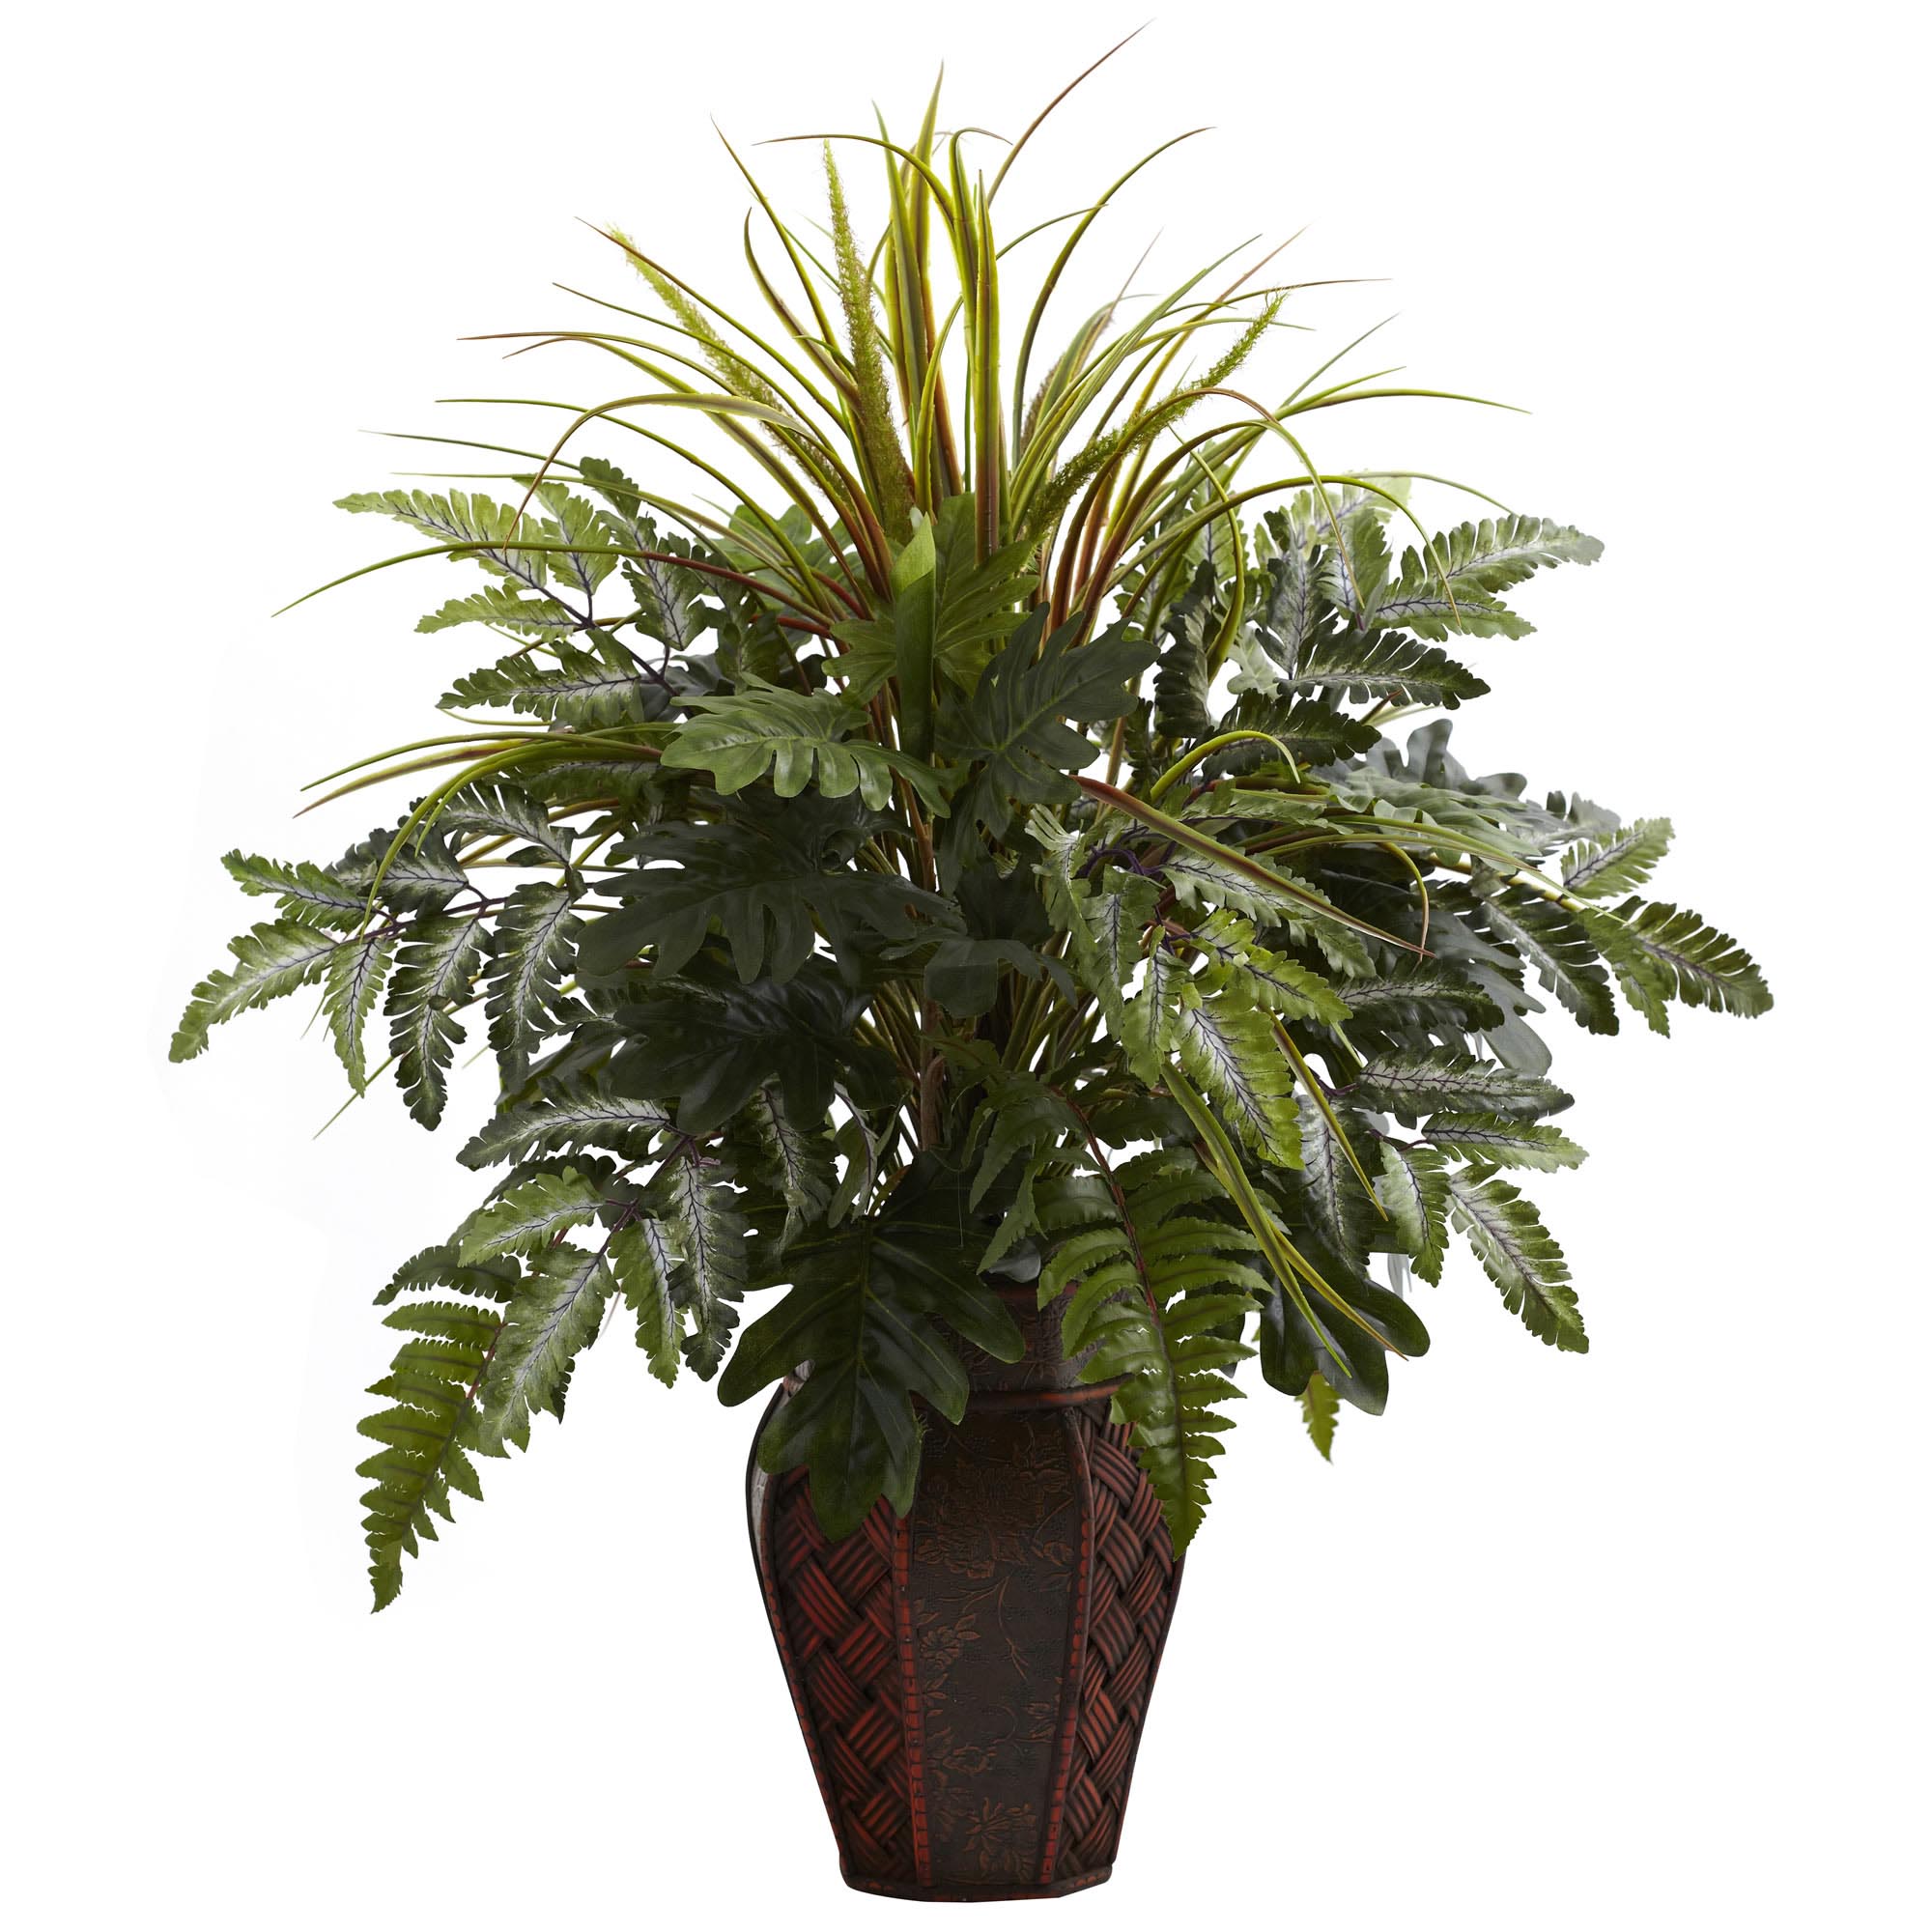 29 Inch Artificial Mixed Grass & Fern In Decorative Planter